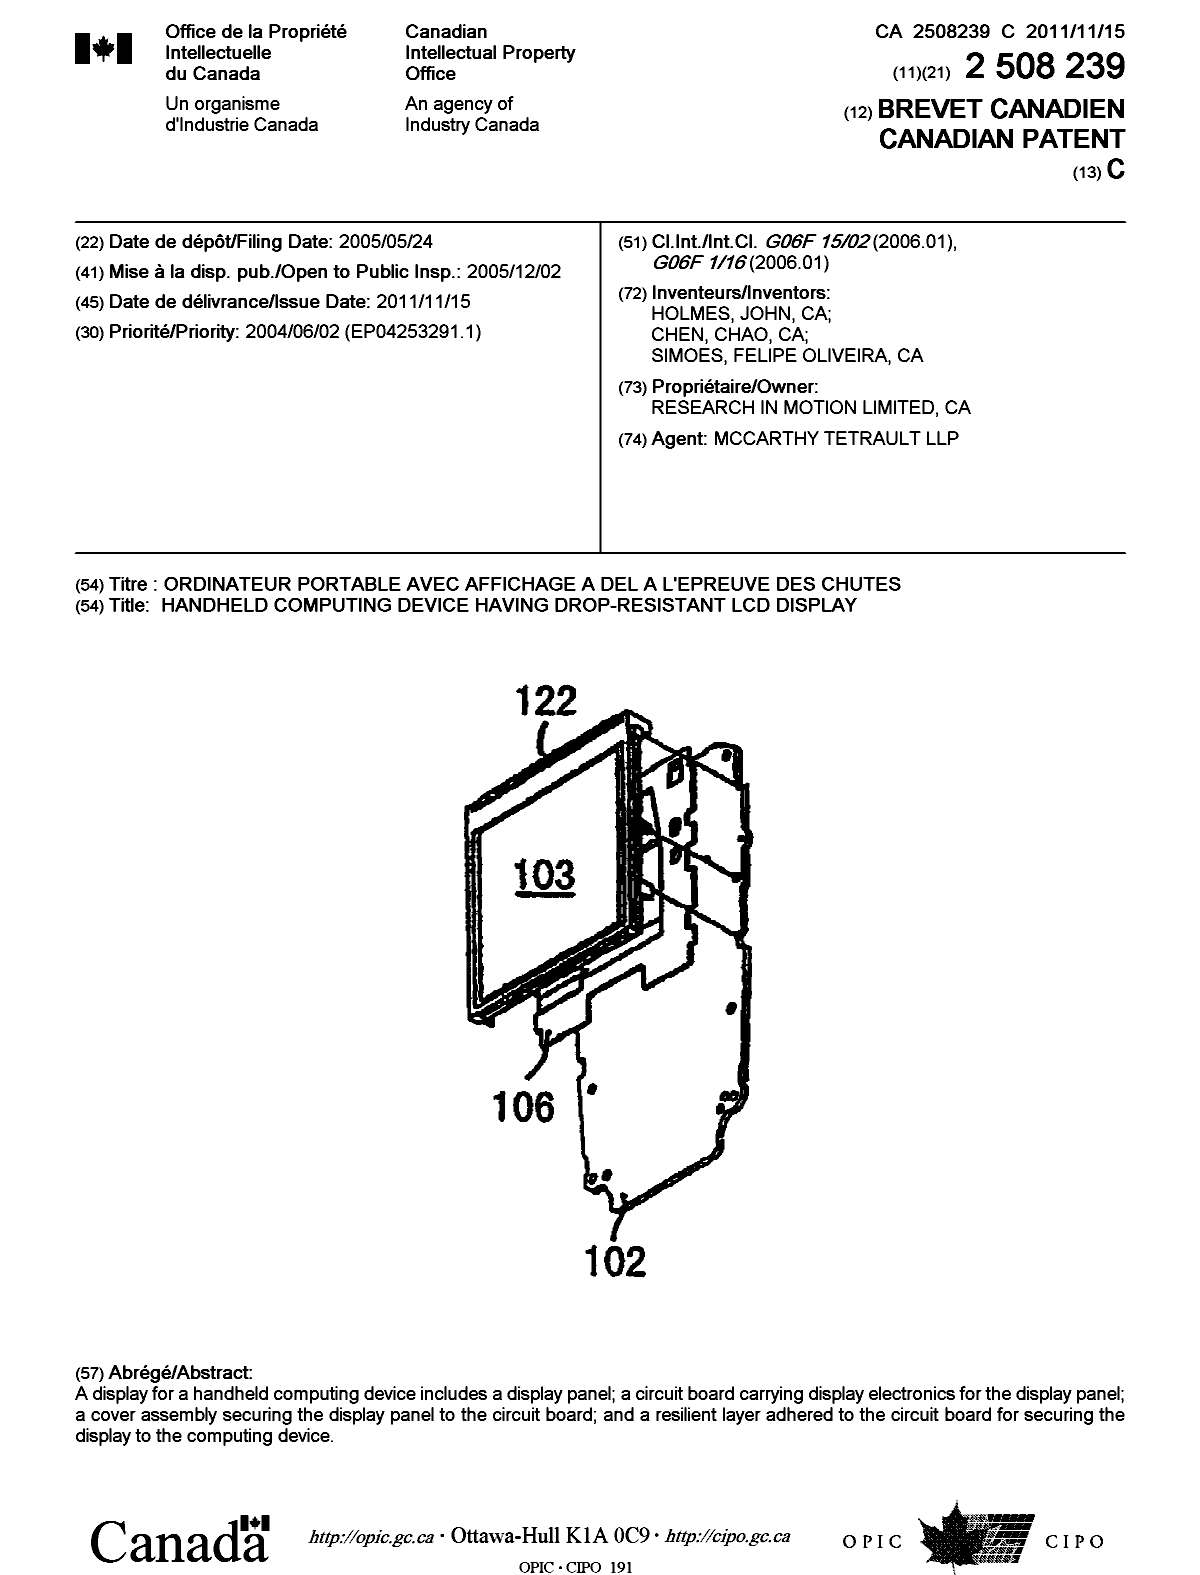 Canadian Patent Document 2508239. Cover Page 20101212. Image 1 of 1